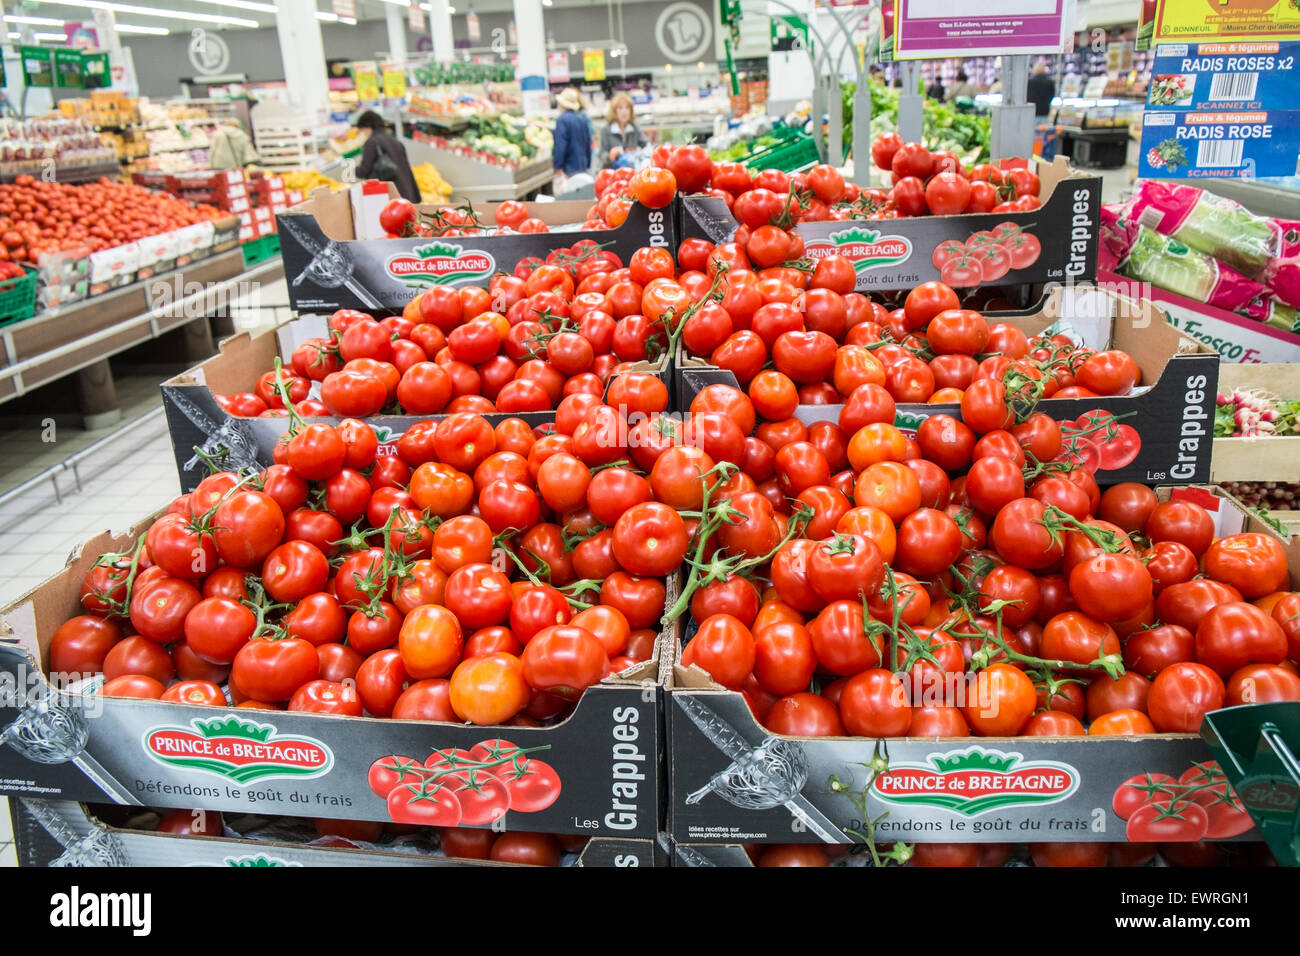 Goods for sale at huge supermarket in Creteil in suburbs of Paris, France. Stock Photo